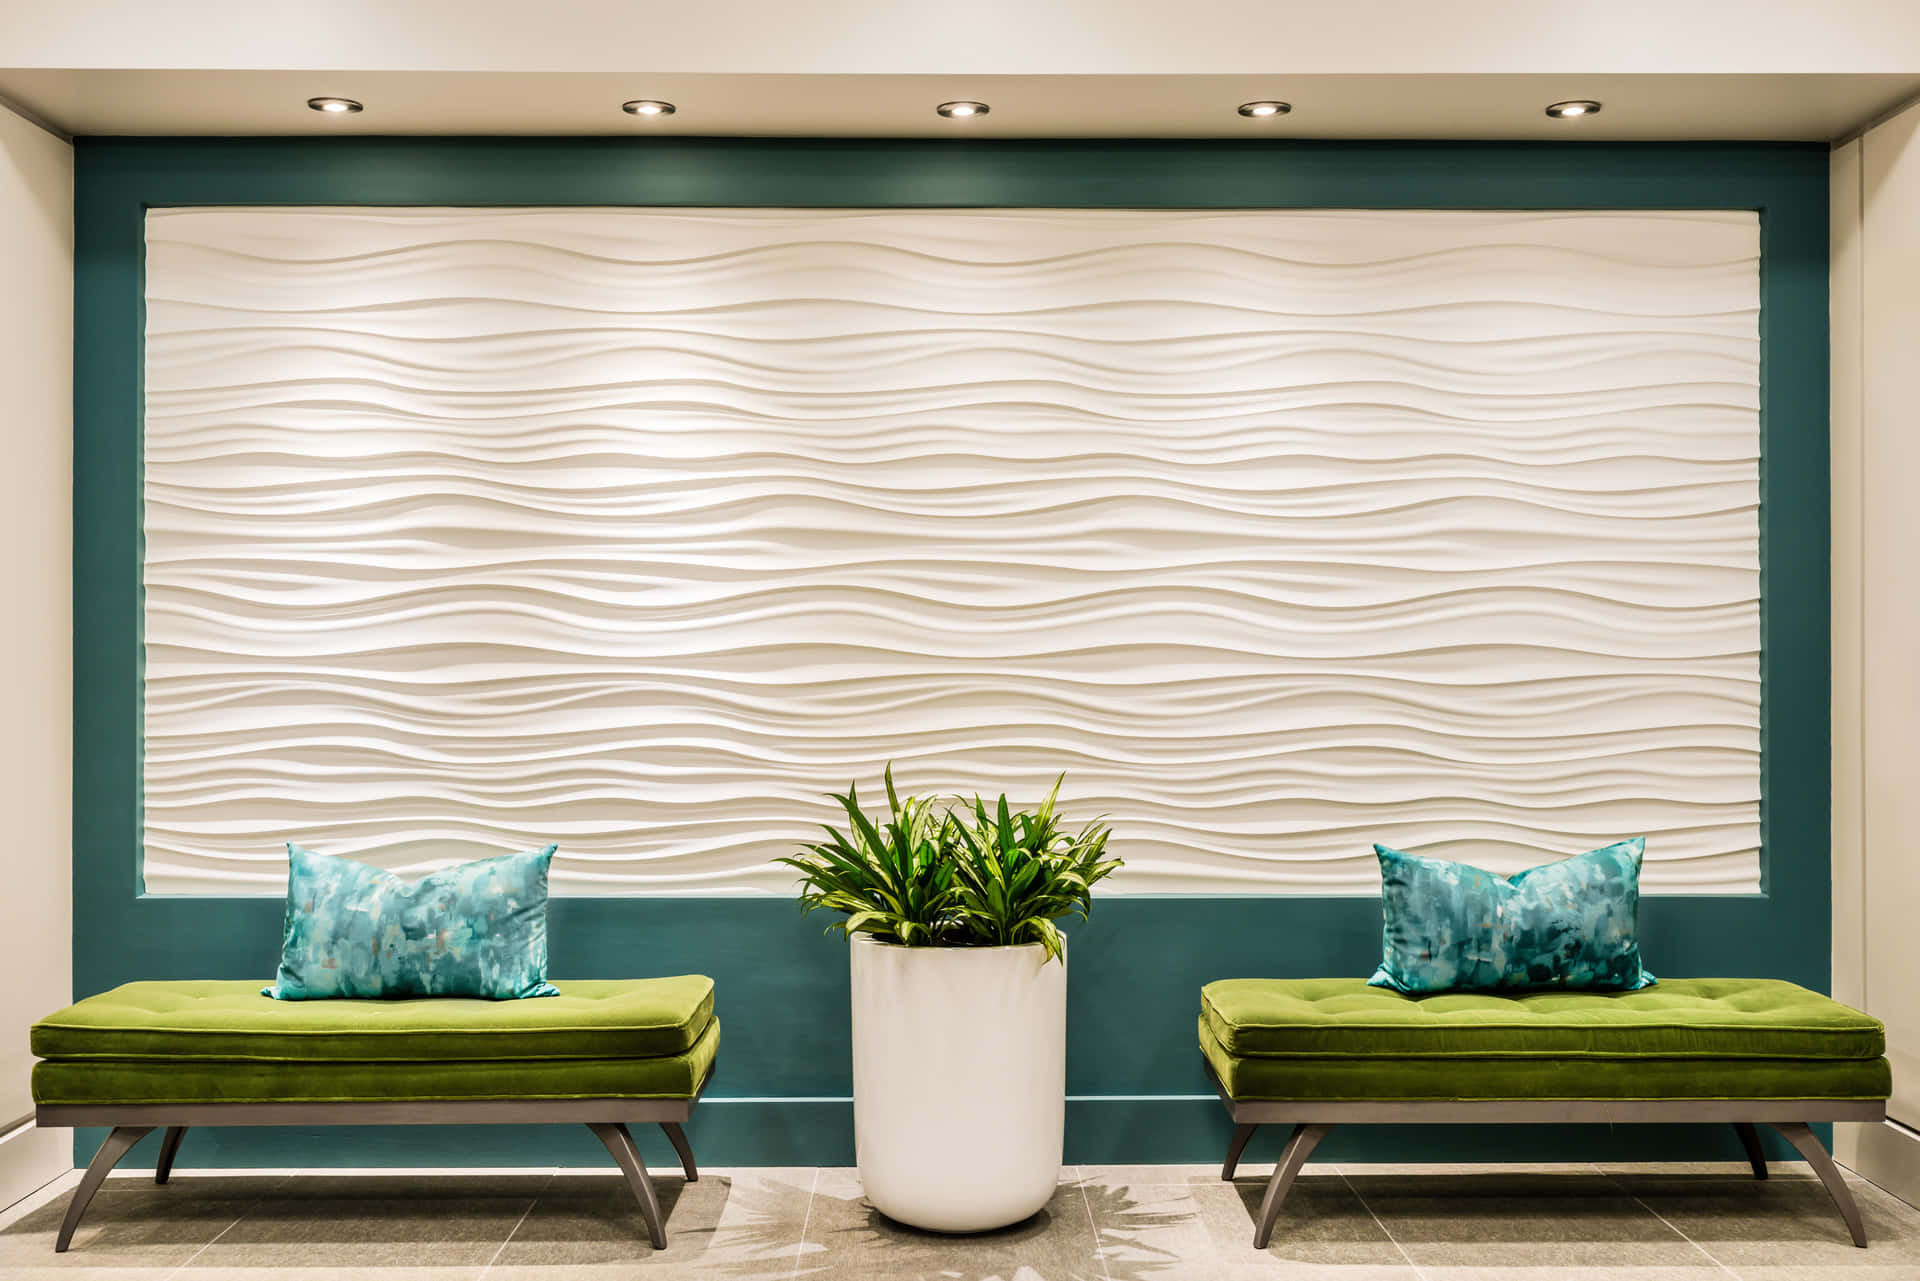 Modern Lobby Interior With Wave Wall Design Wallpaper